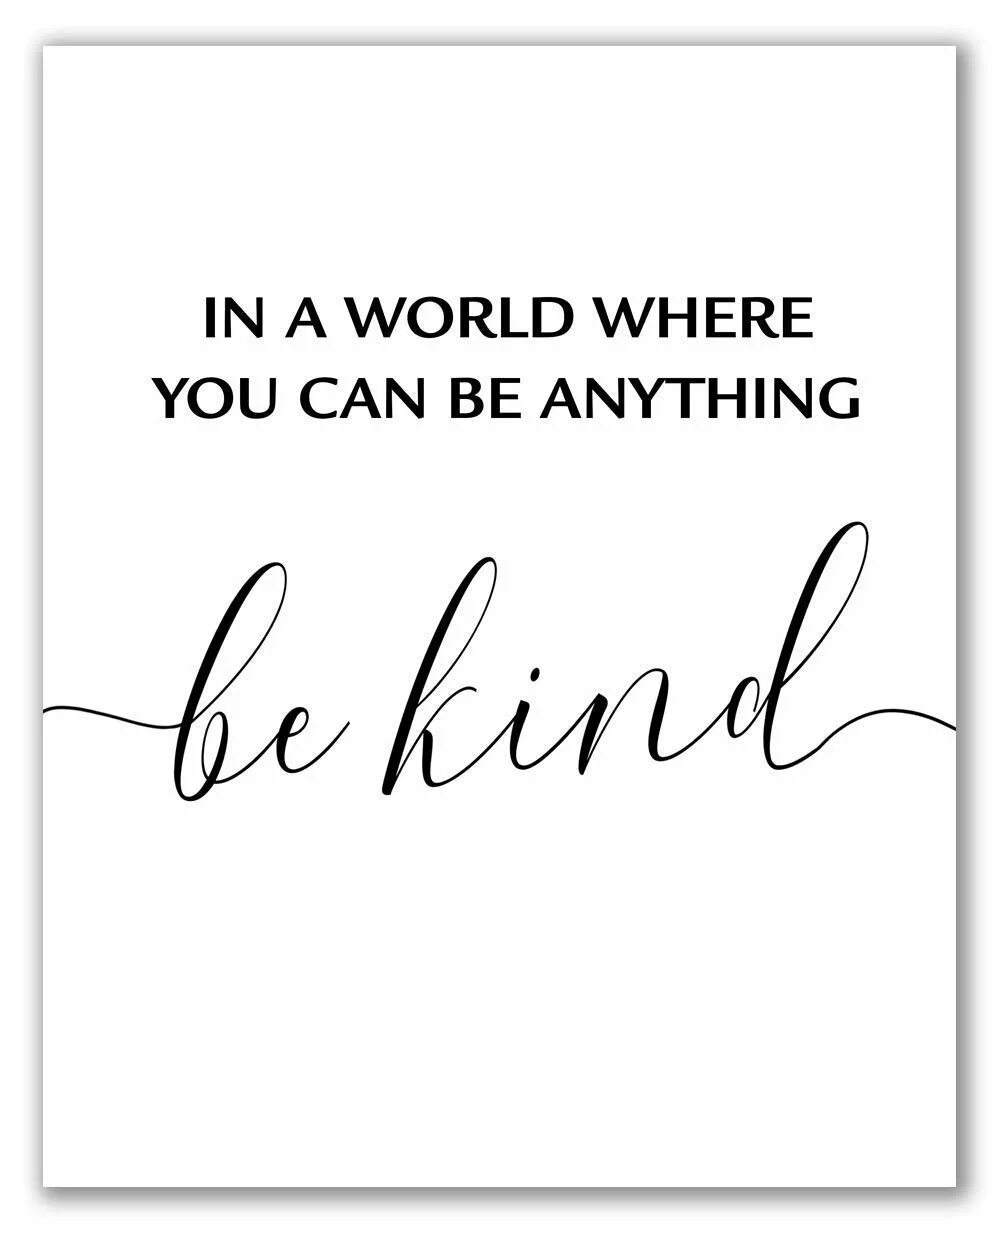 In a World where you can be anything be kind. Be kind картинка. You can be anything. You could be.